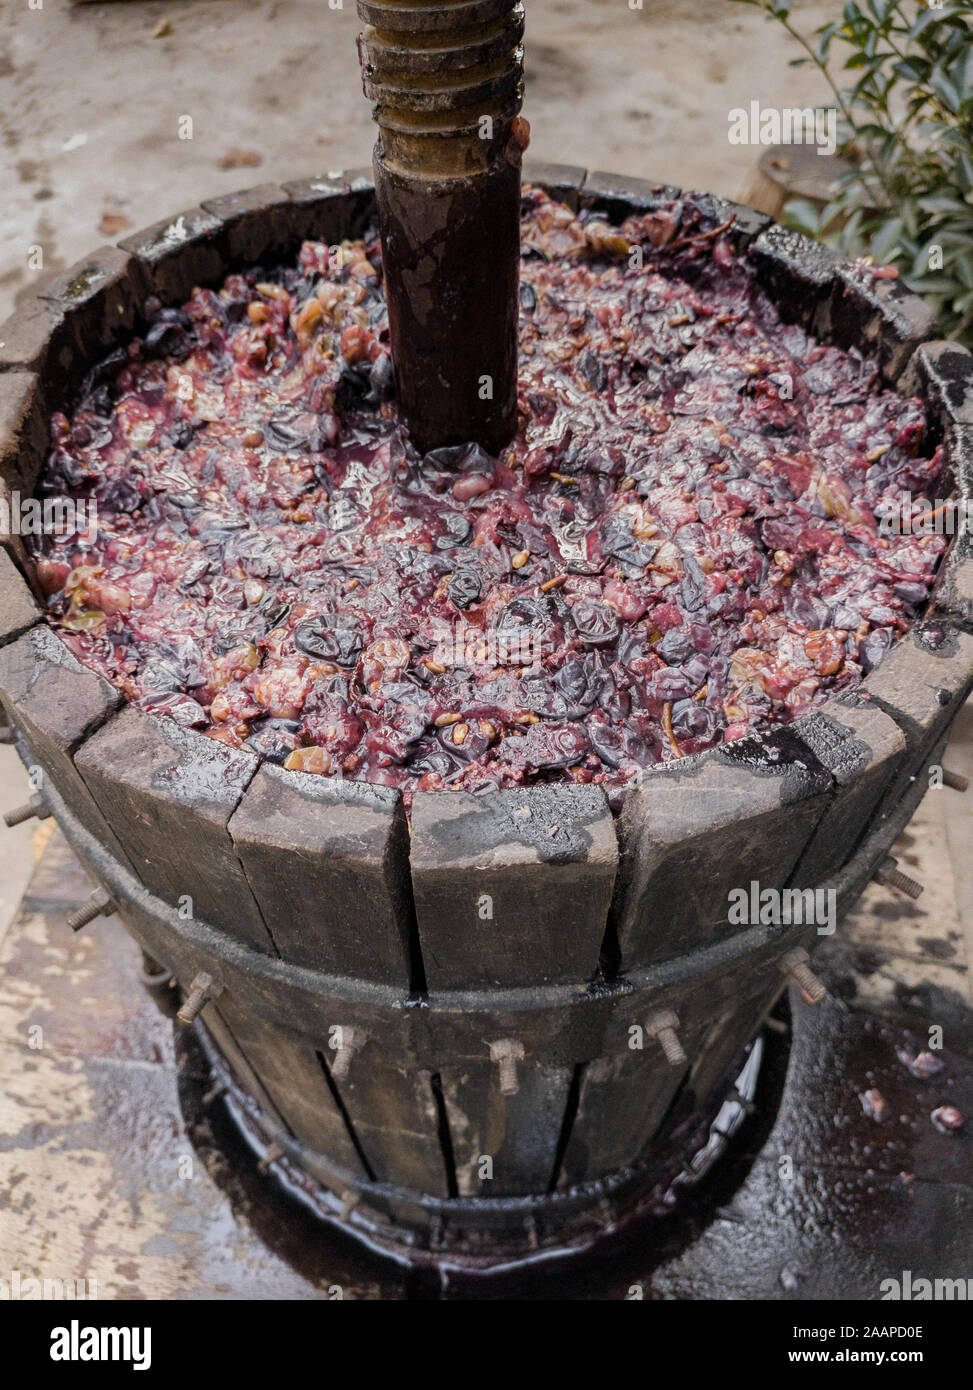 Making wine at home. Old wooden wine press Stock Photo